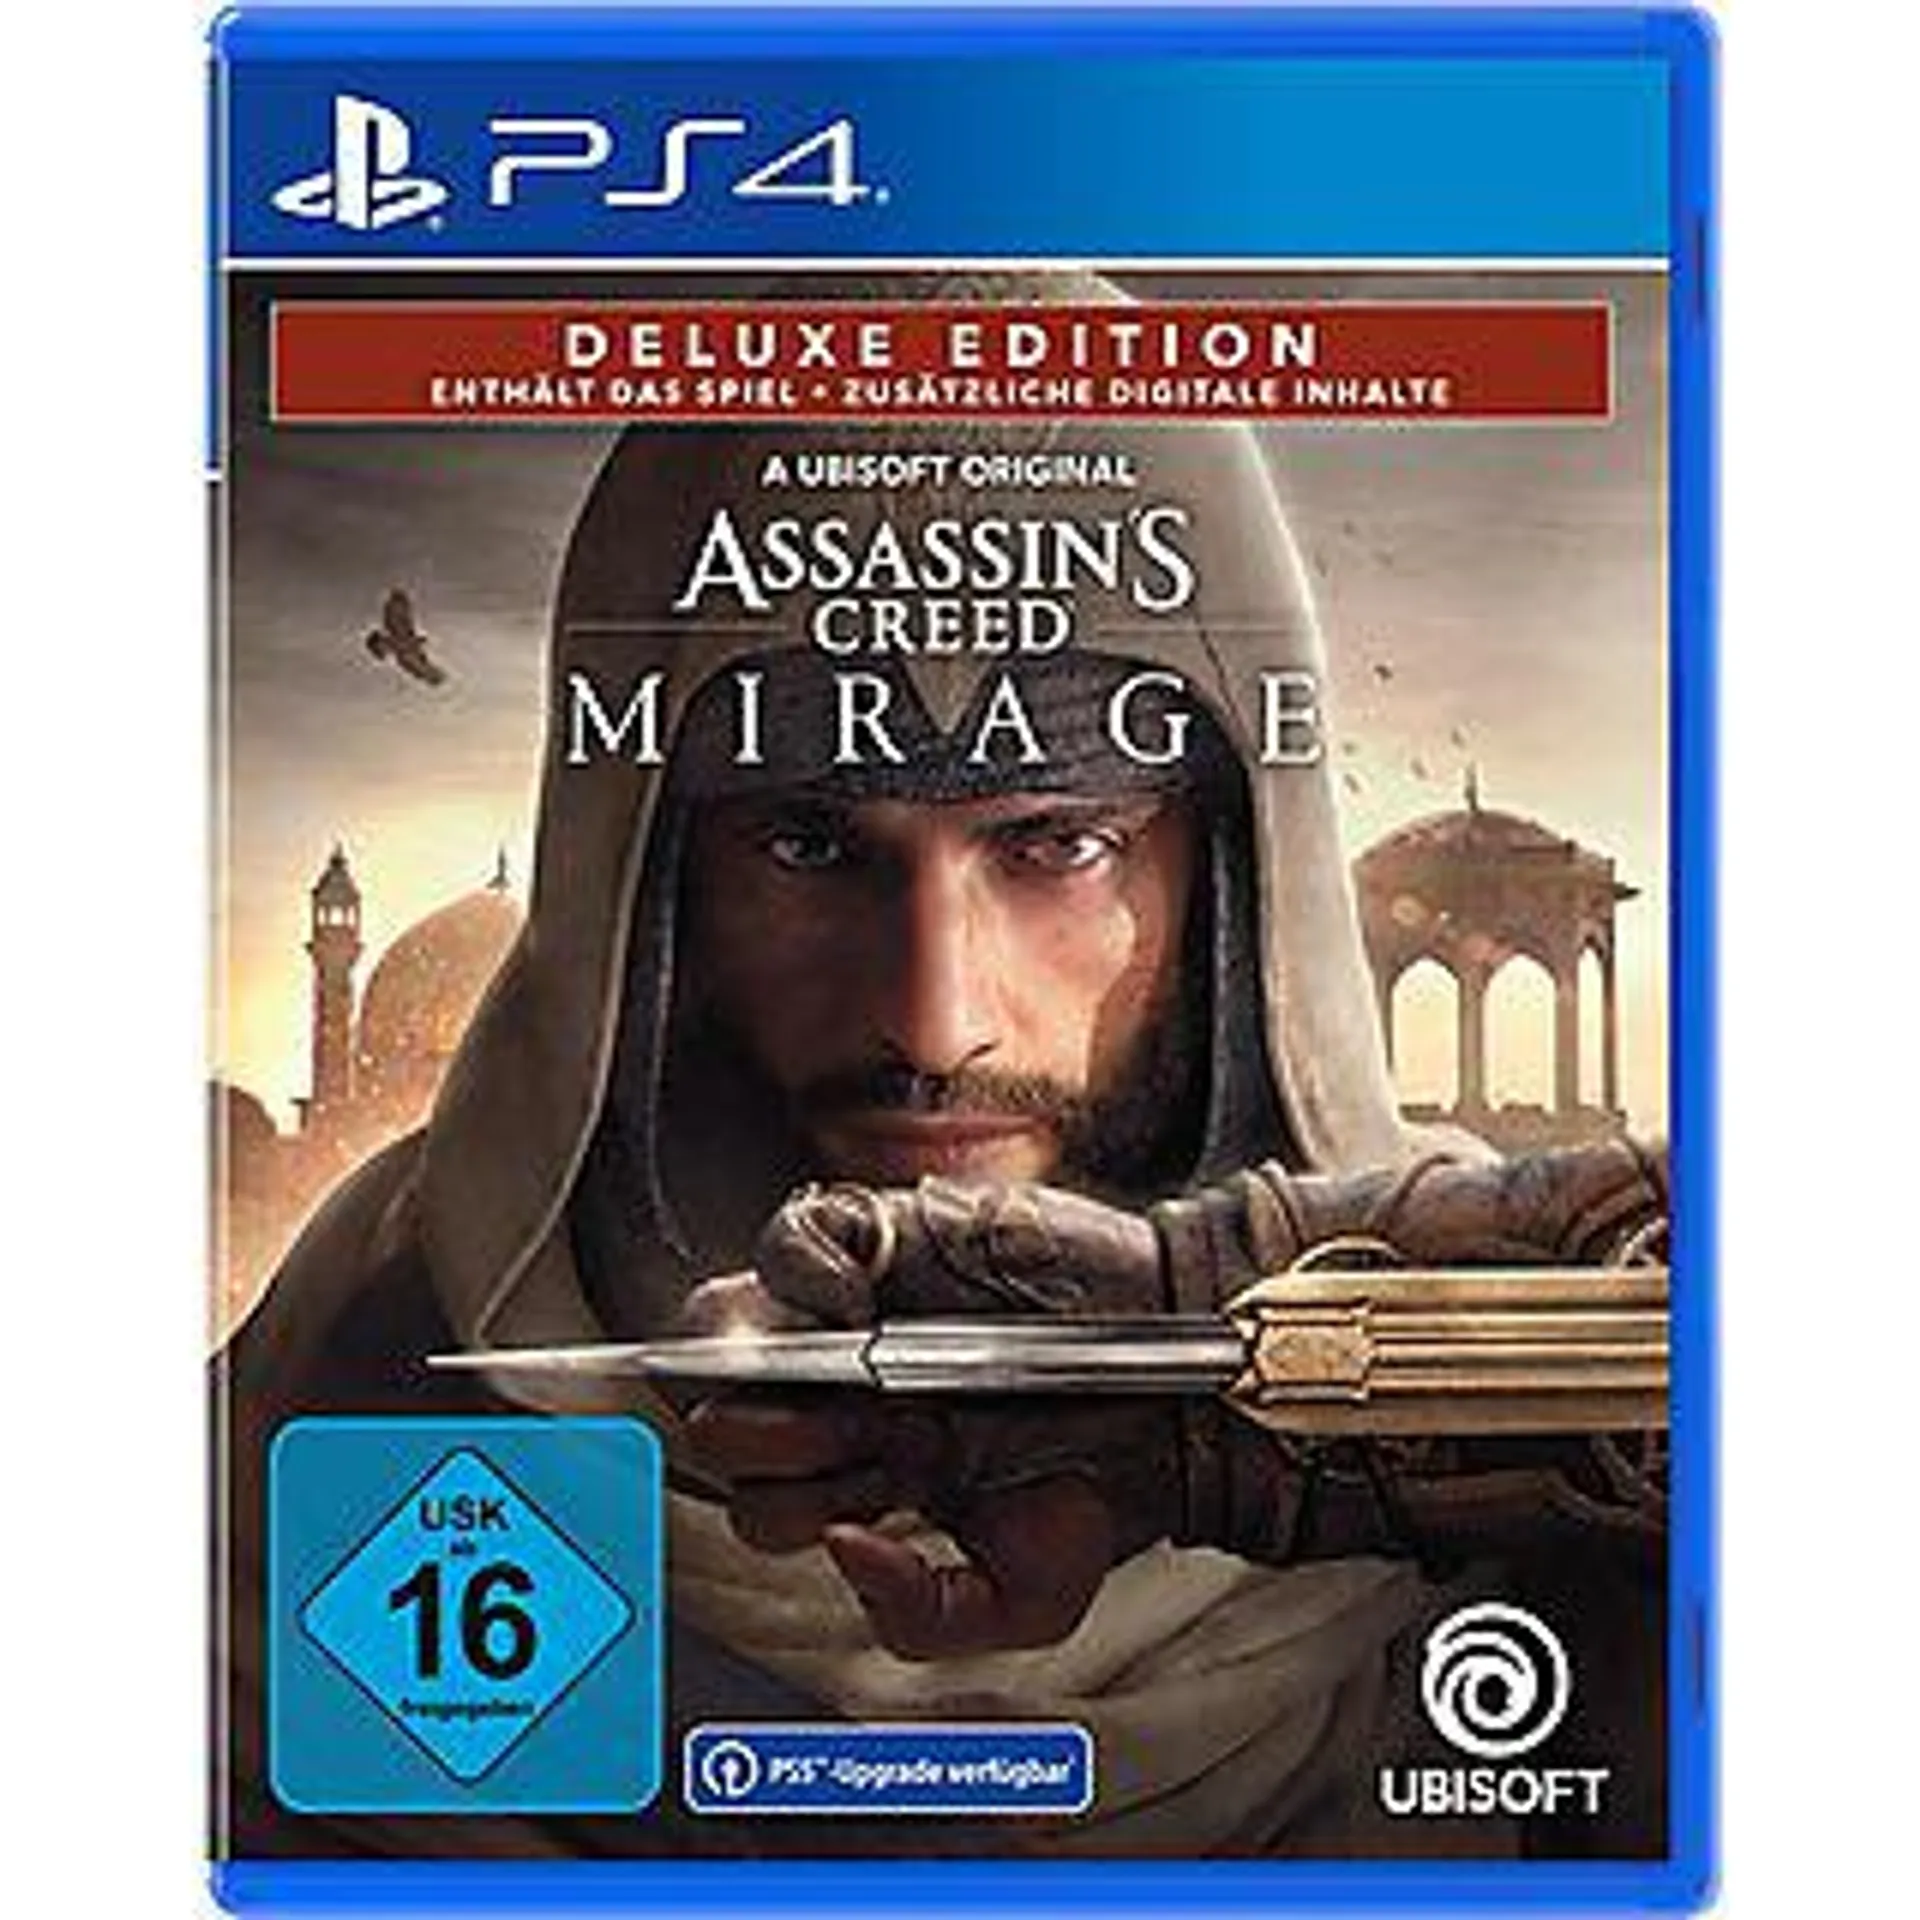 Assassin's Creed Mirage - Deluxe Edition - [PlayStation 4]